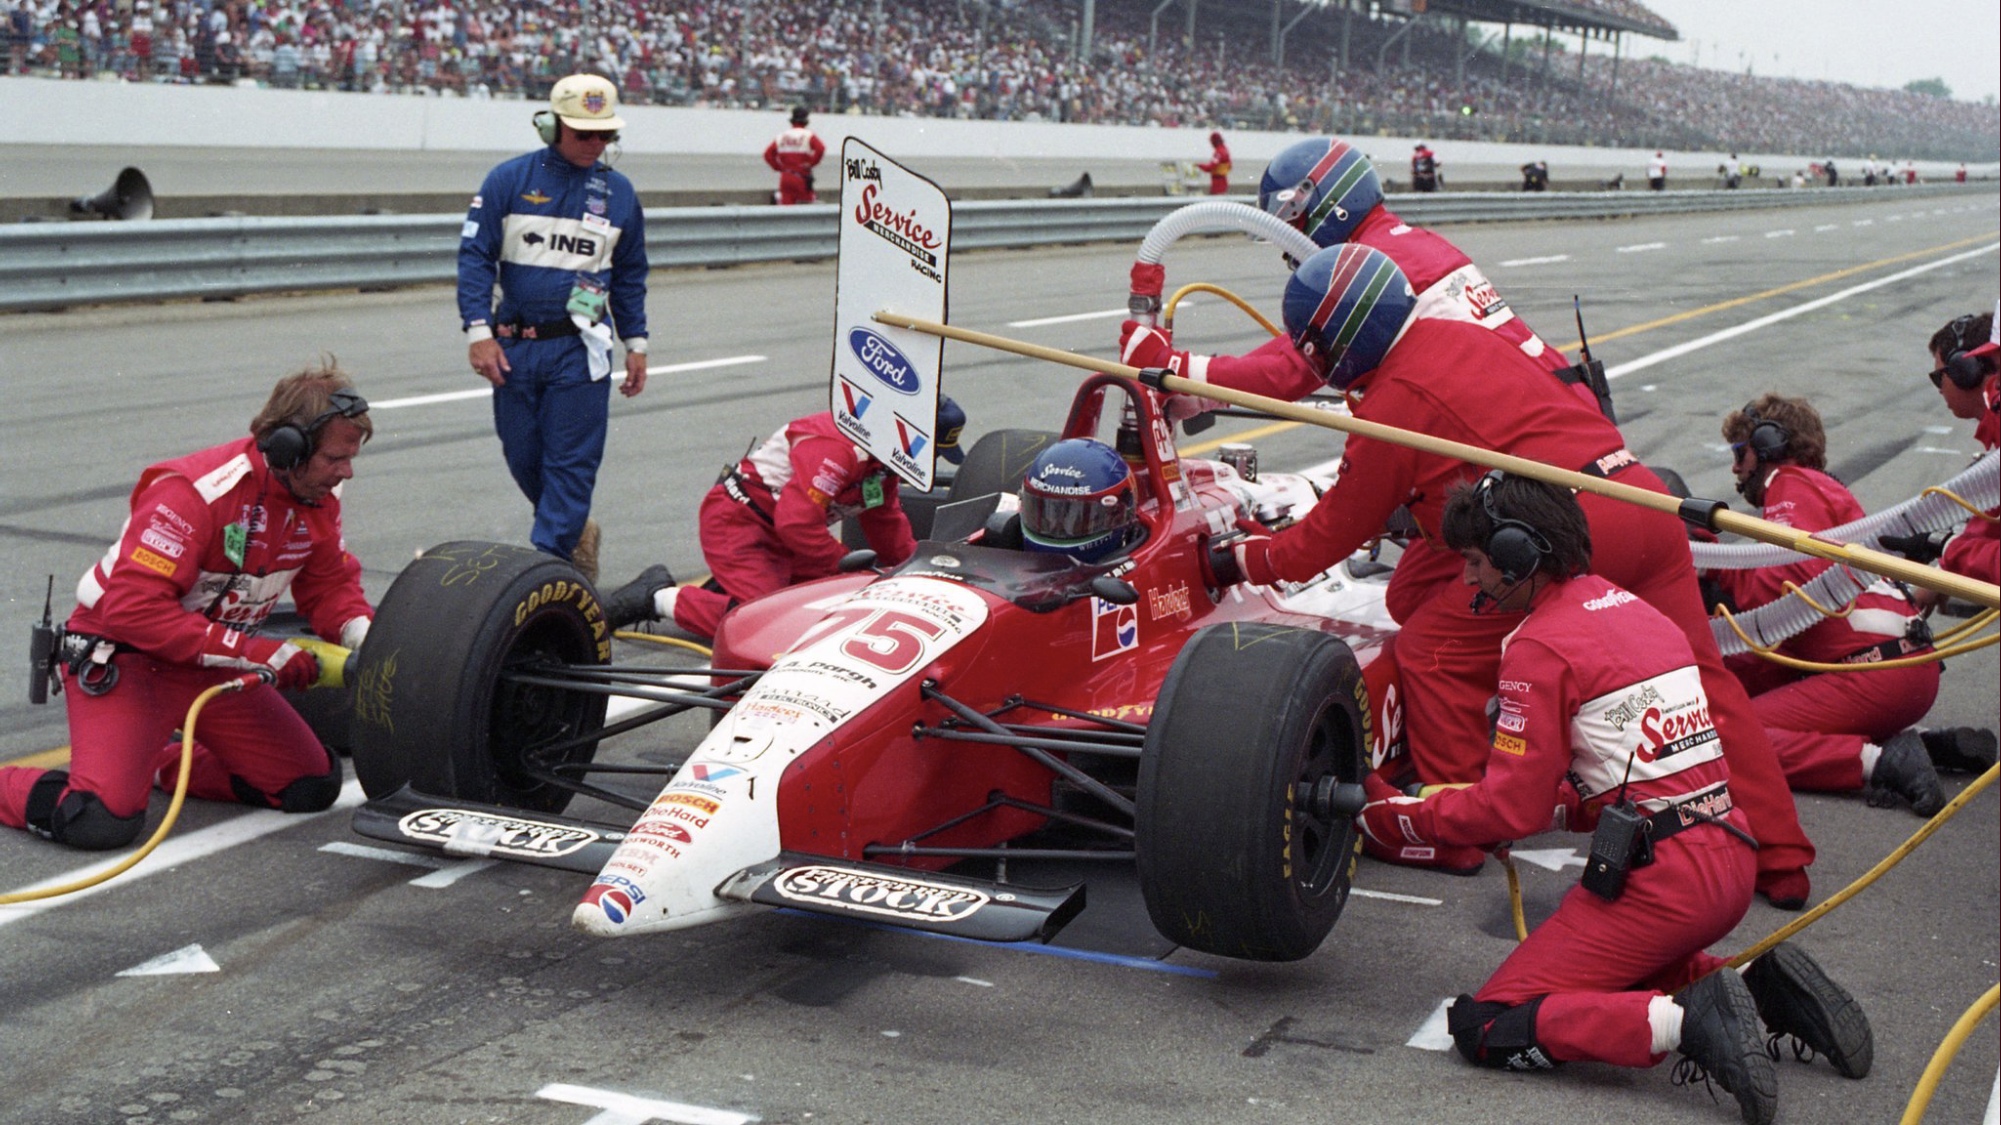 Ribbs receives great service work from his pit crew during at pit stop at the Indy 500.